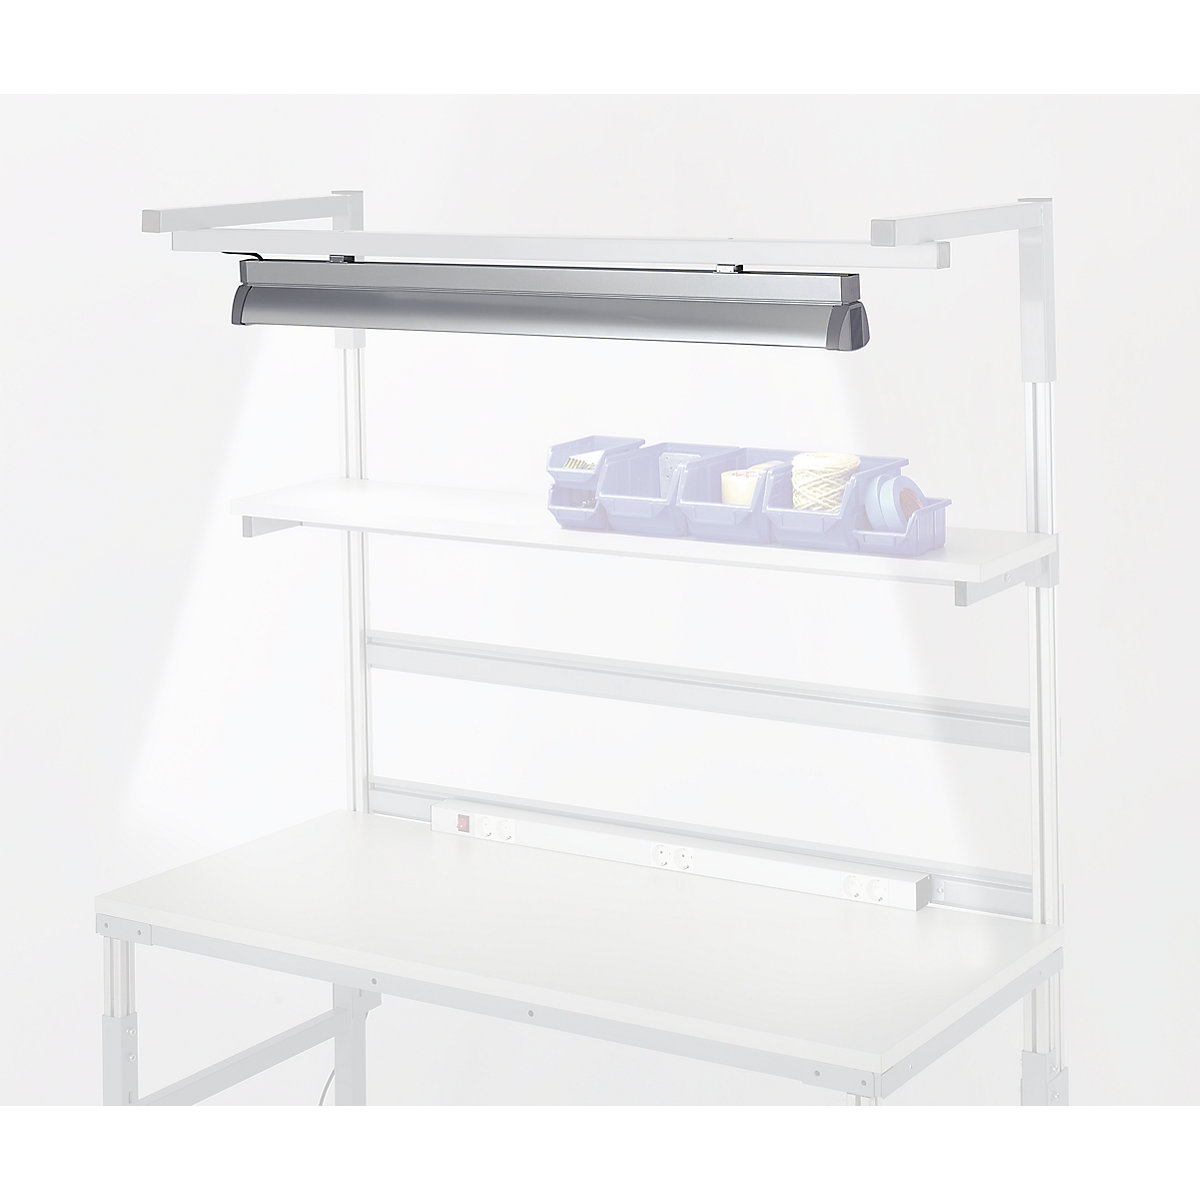 Workstation lamp – RAU, 2 x 54 W fluorescent tubes, length 1200 mm, for table width 1800 mm-3